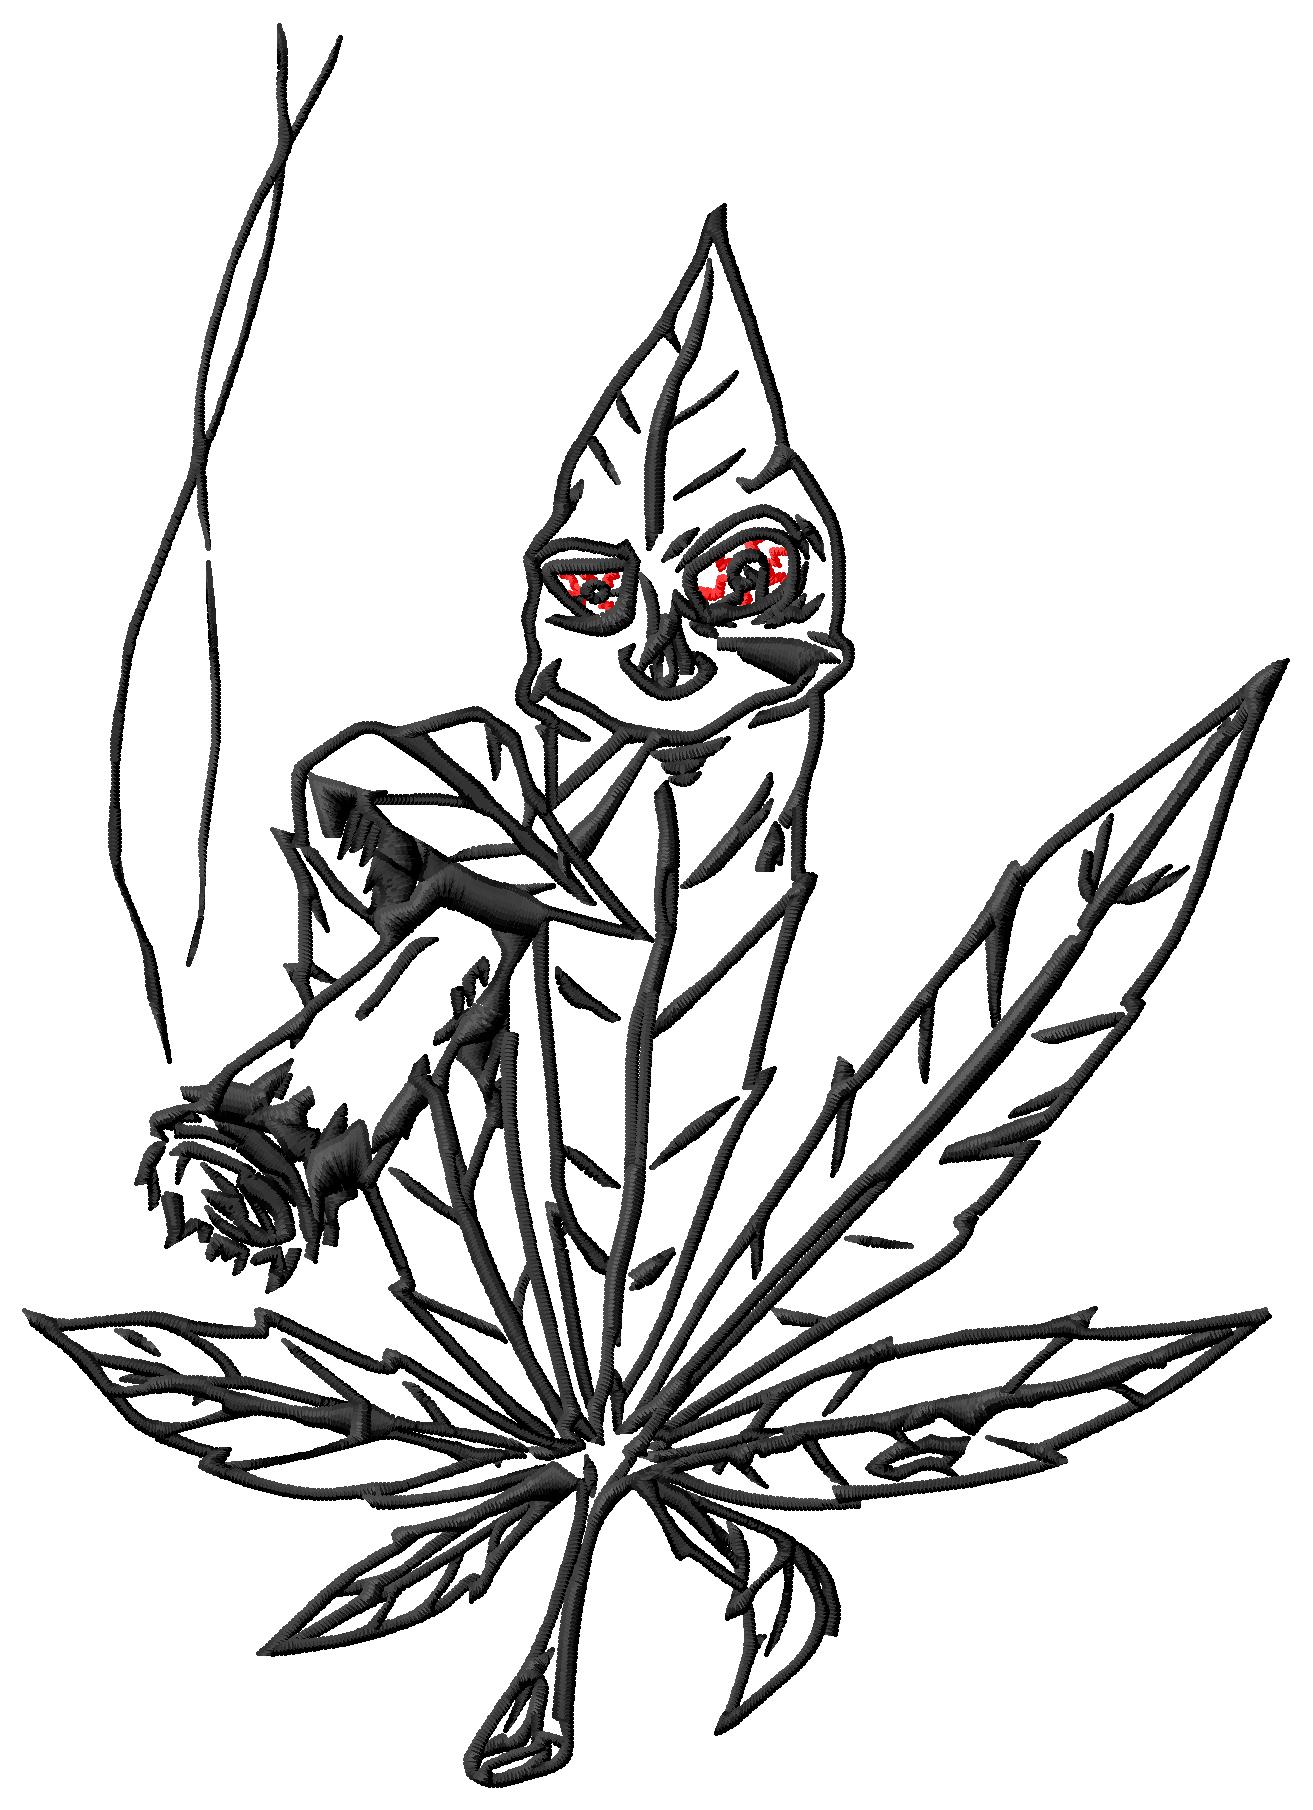 Weed Symbol Tumblr   Clipart Panda   Free Clipart Images